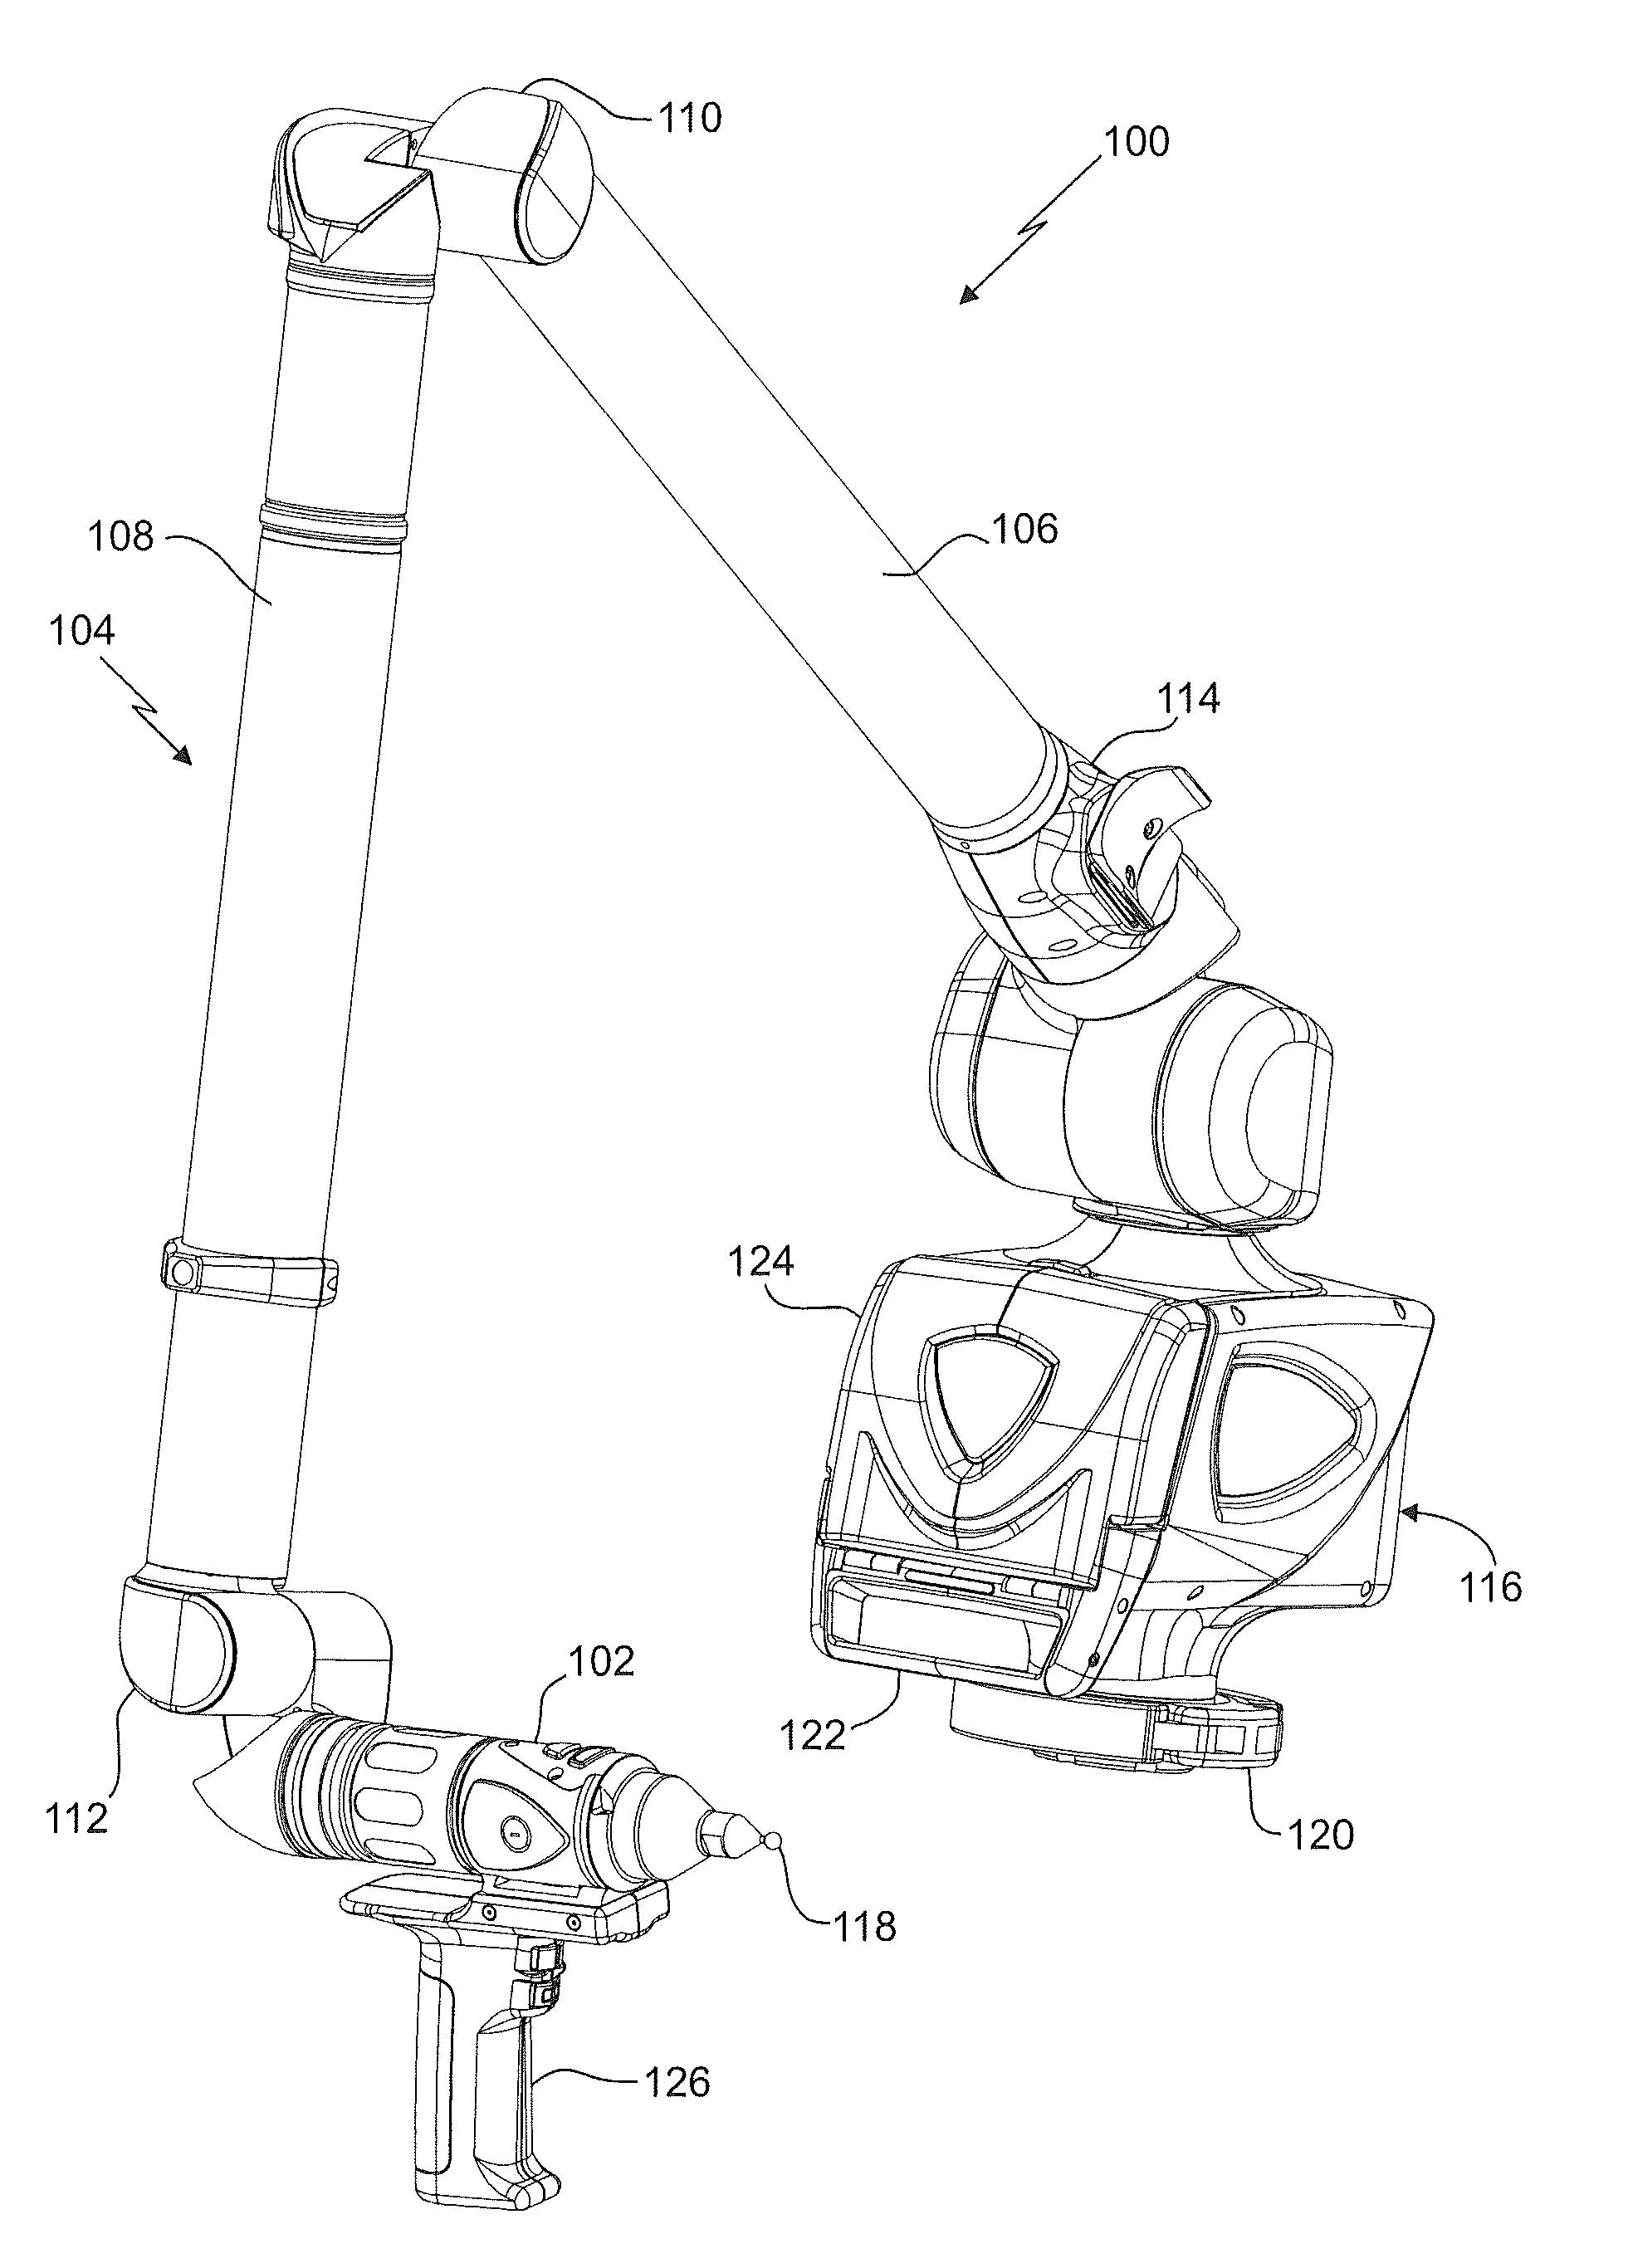 Counter balance for coordinate measurement device